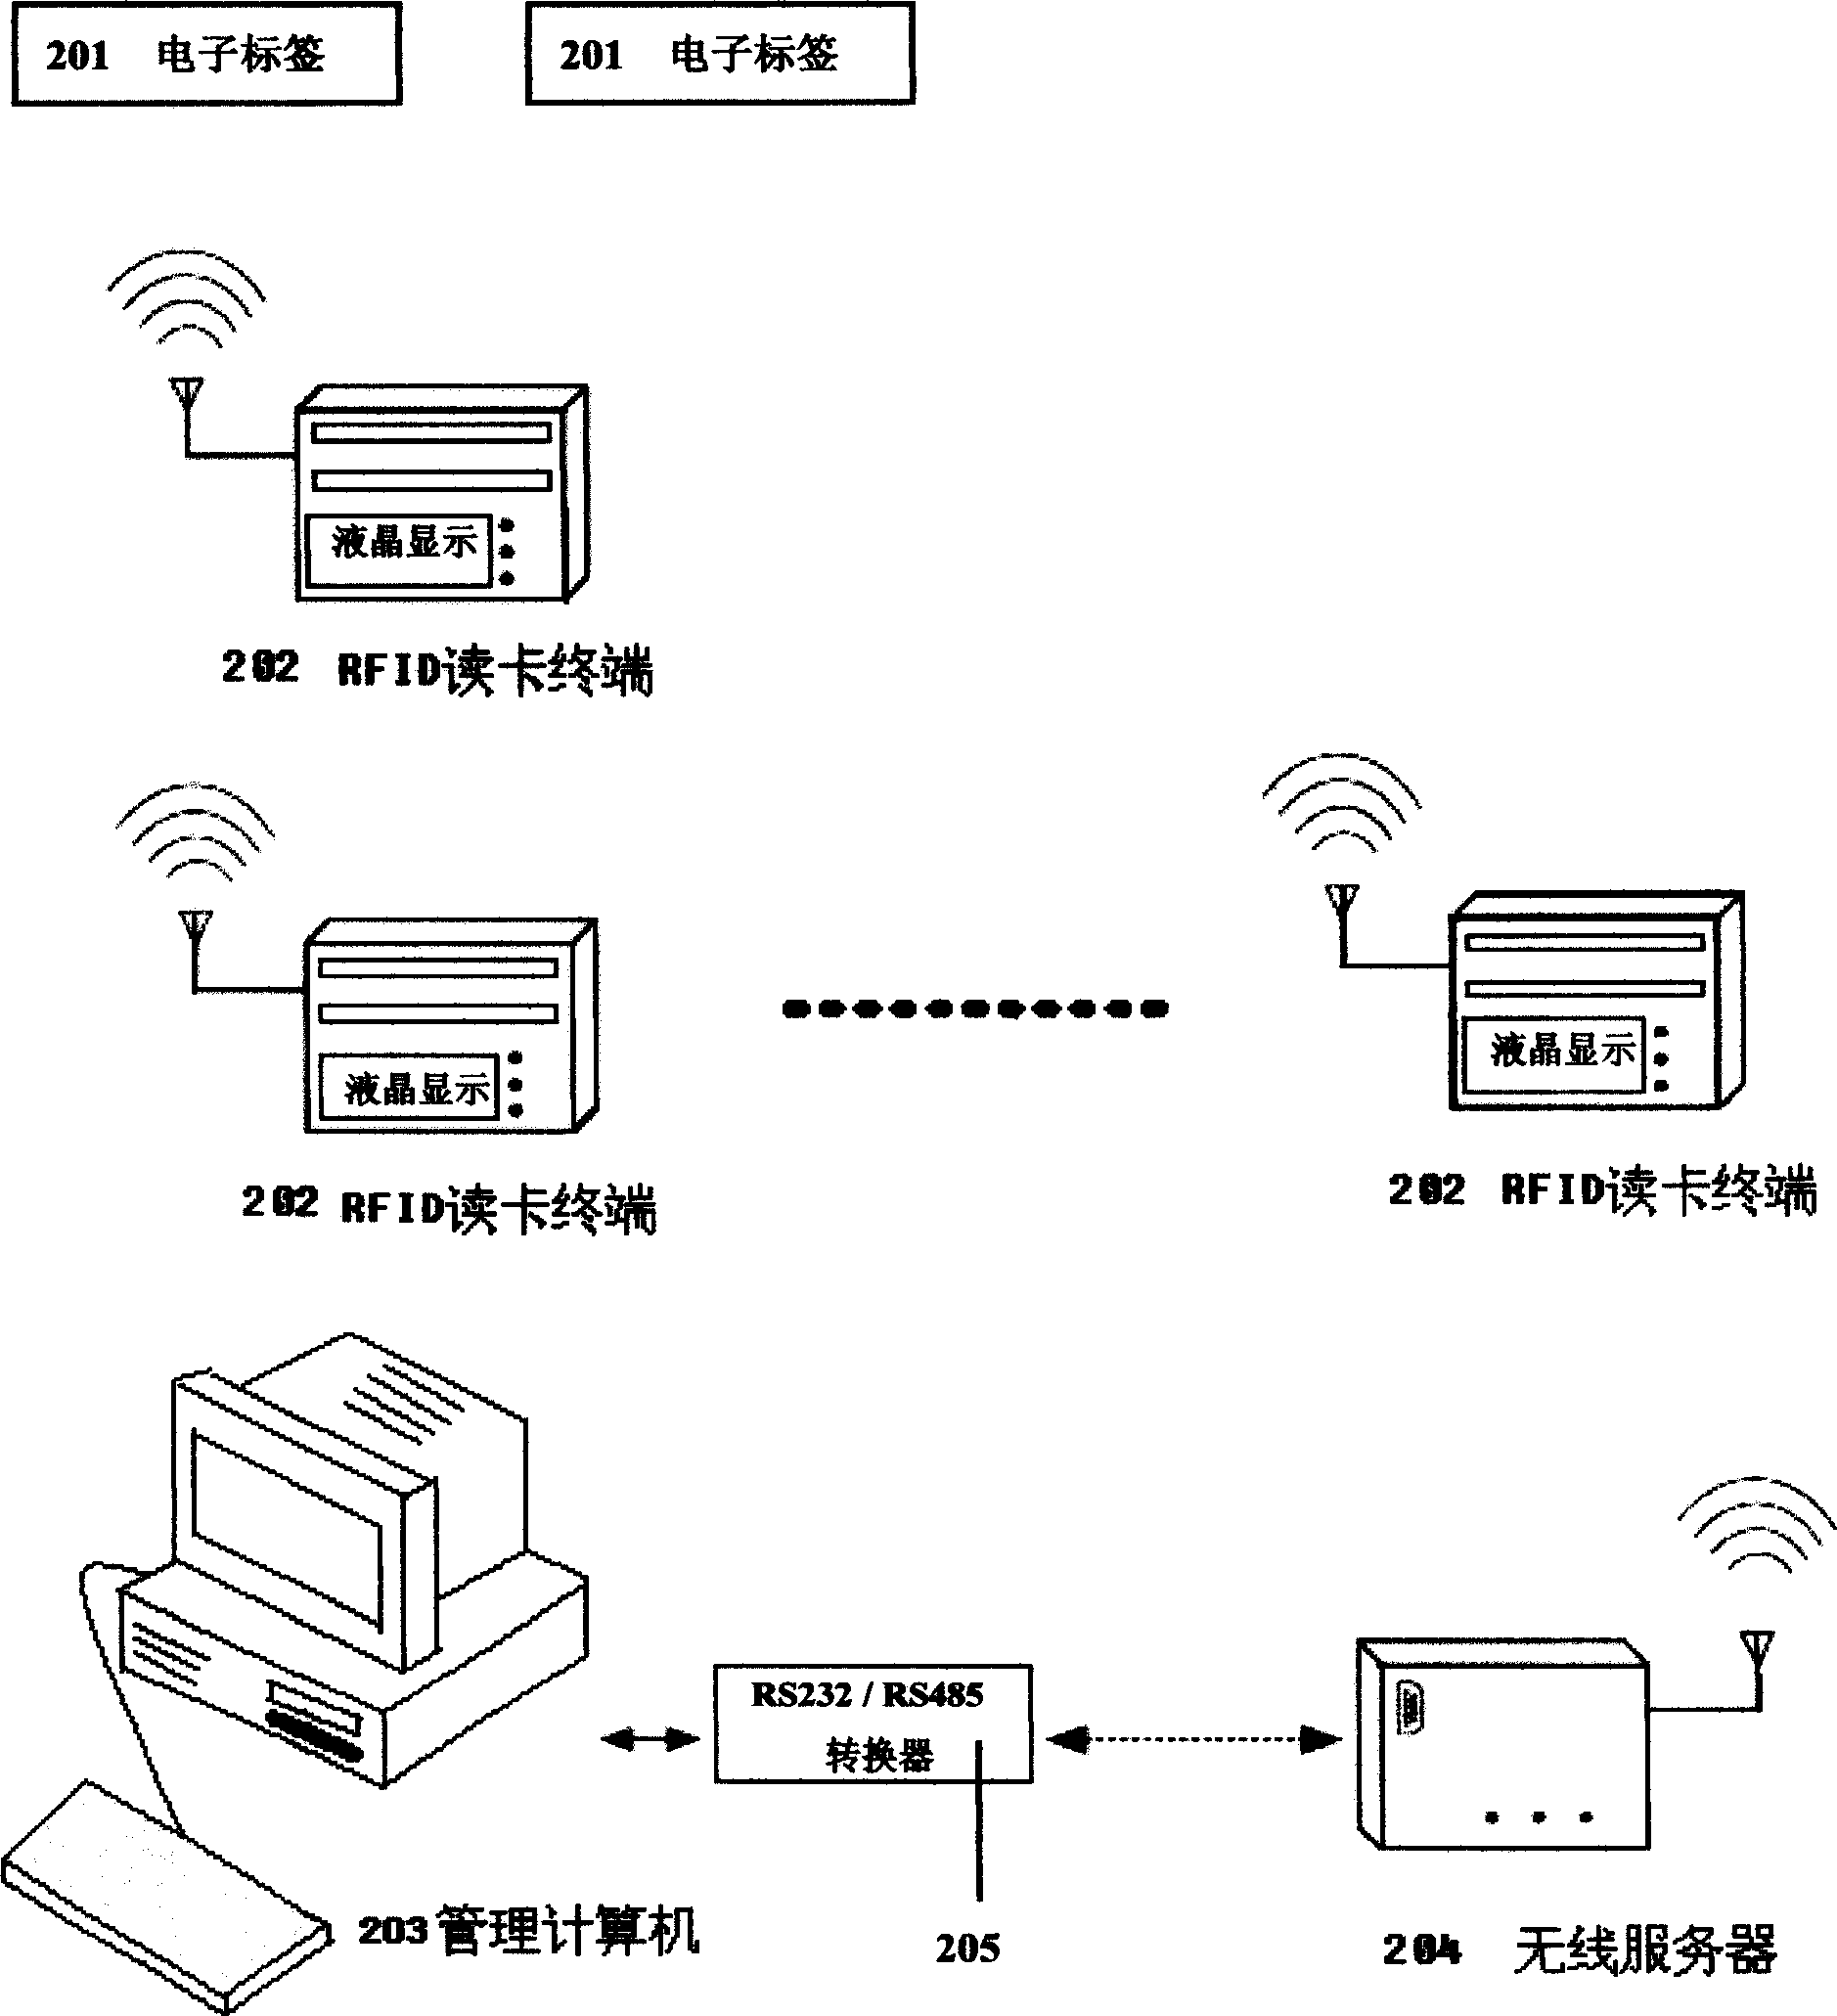 Wireless radio frequency recognition device with bidirectional data transmission and statistics